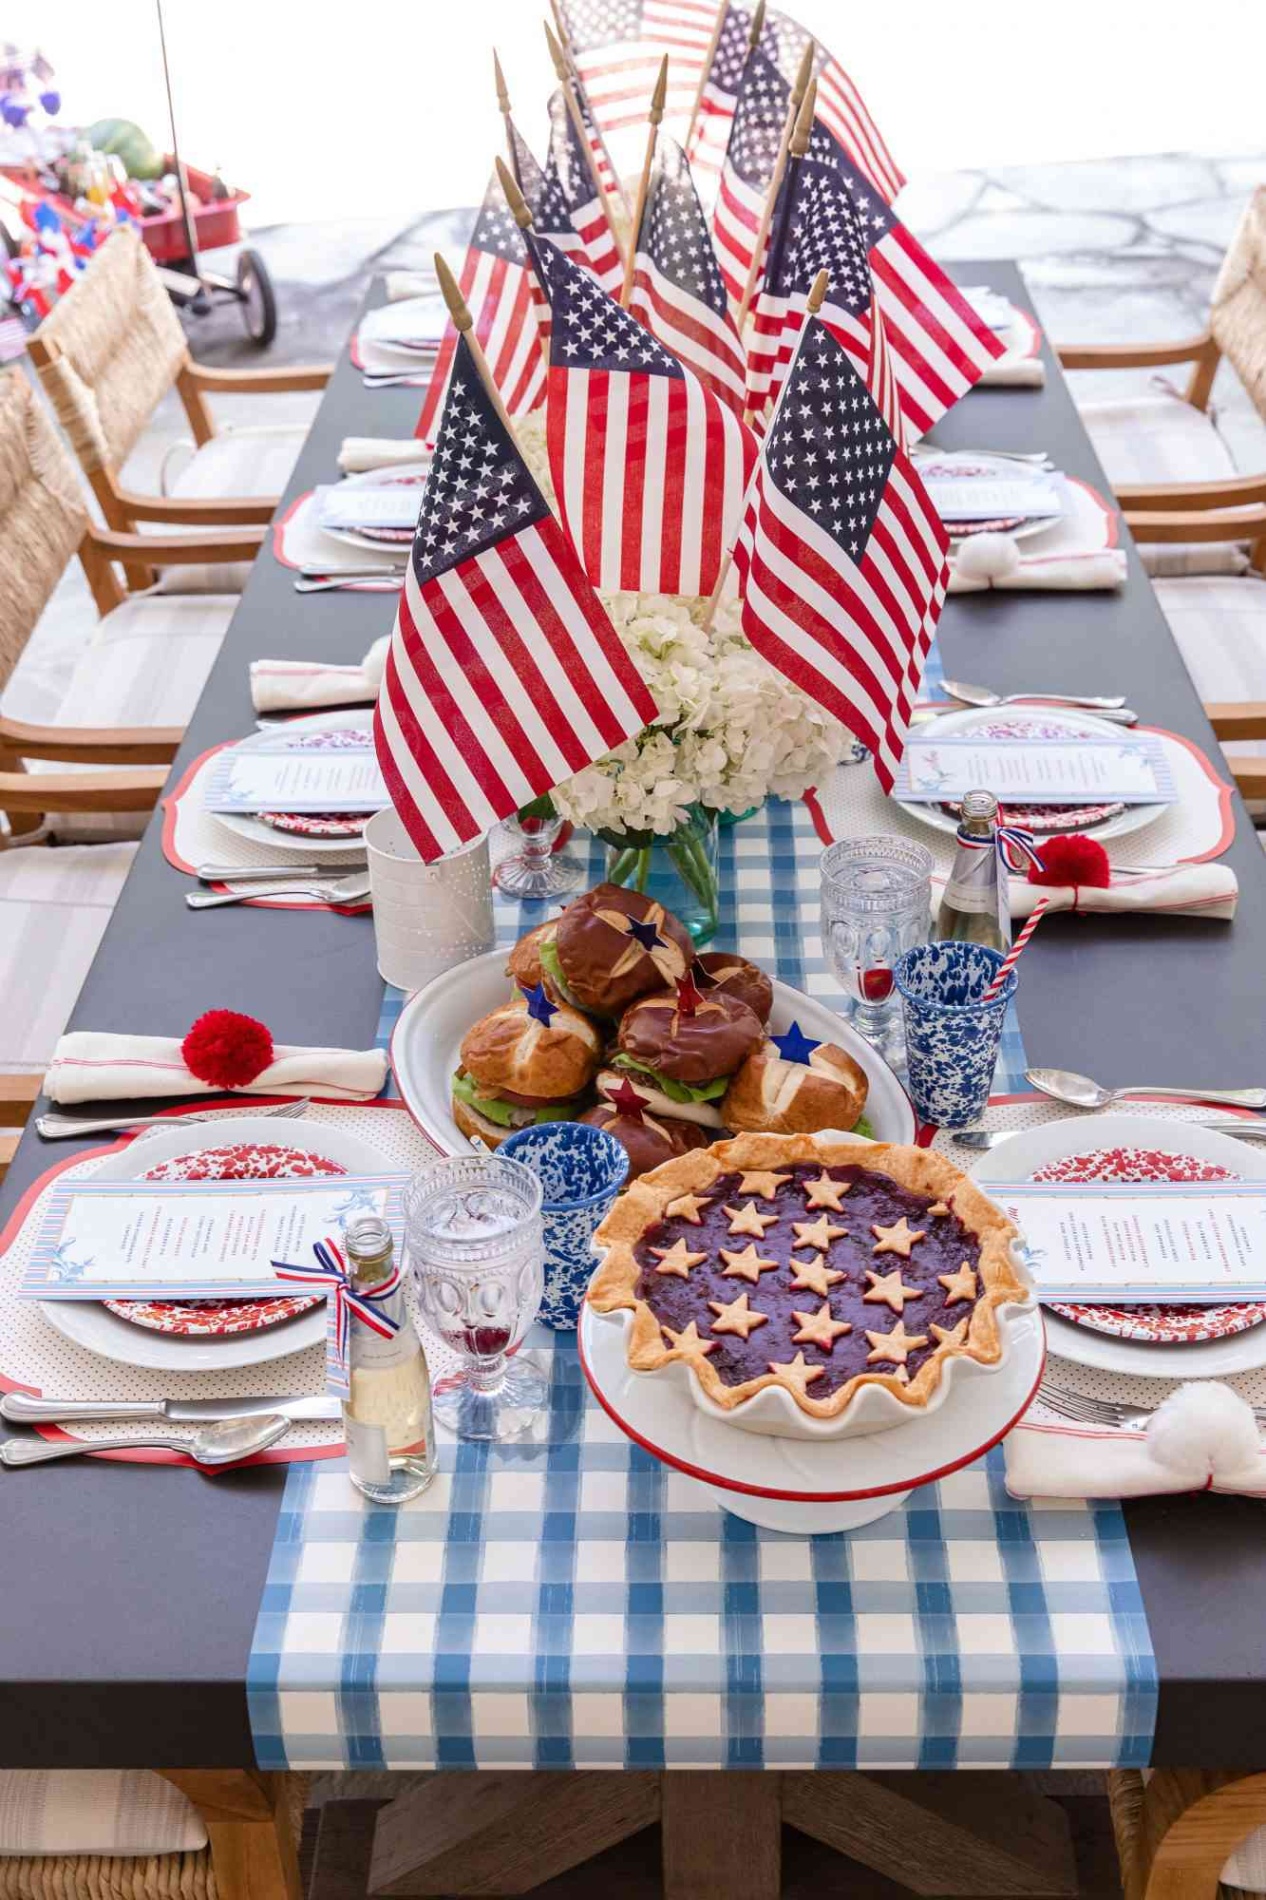 4th of july decor ideas Bulan 1 th of July Party Decorating Ideas